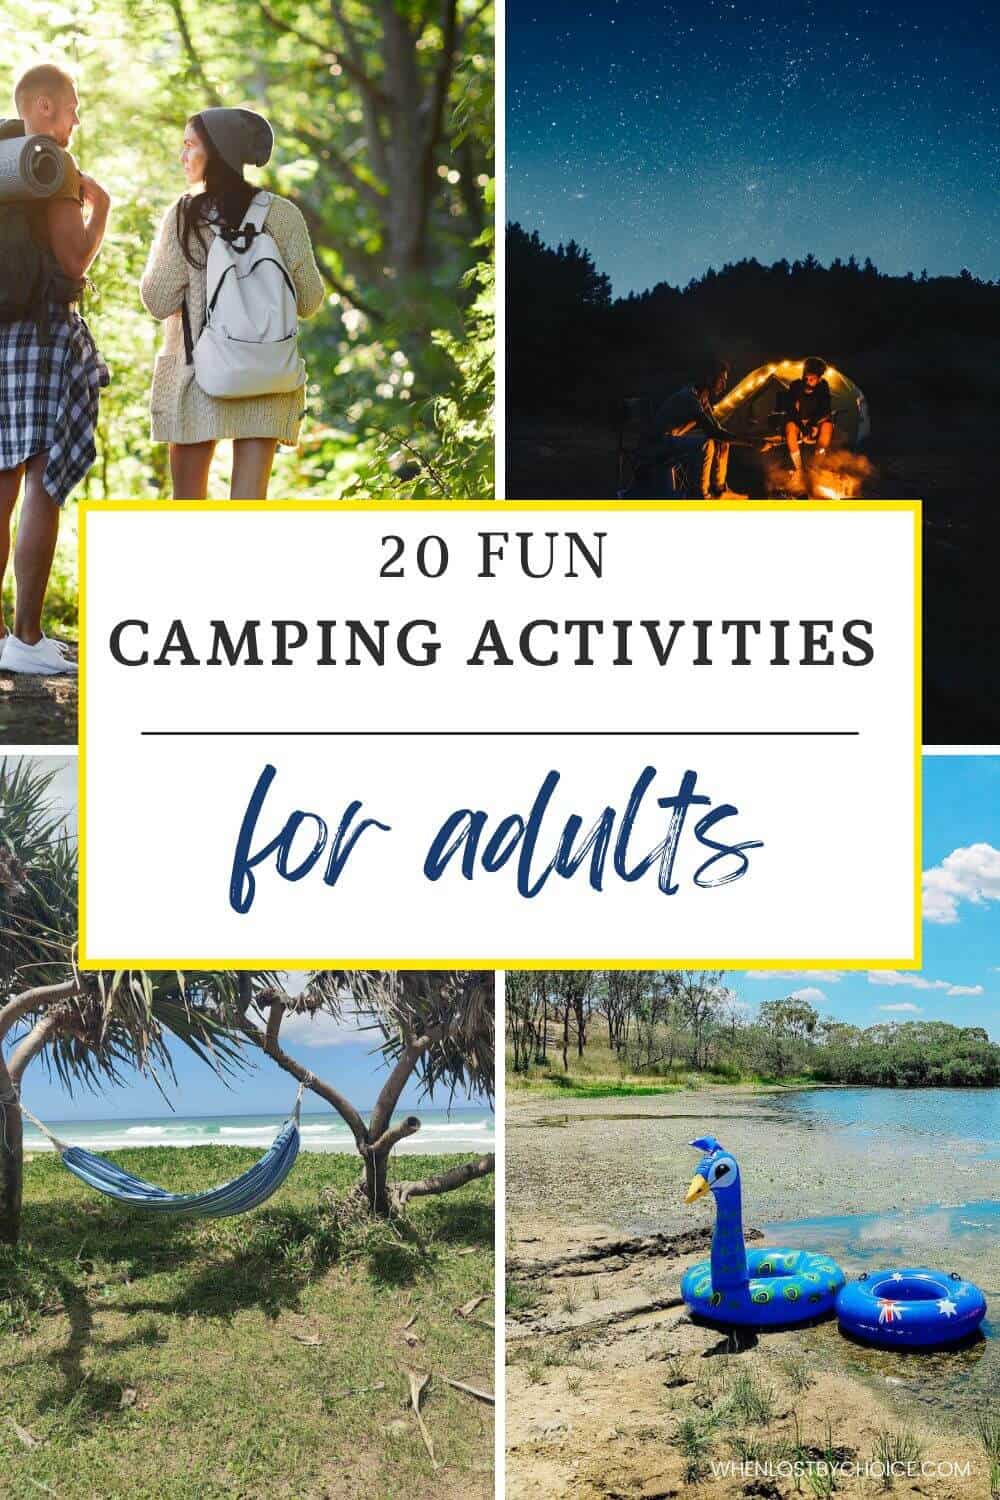 pinterest image - text reads 20 fun camping activities for adults